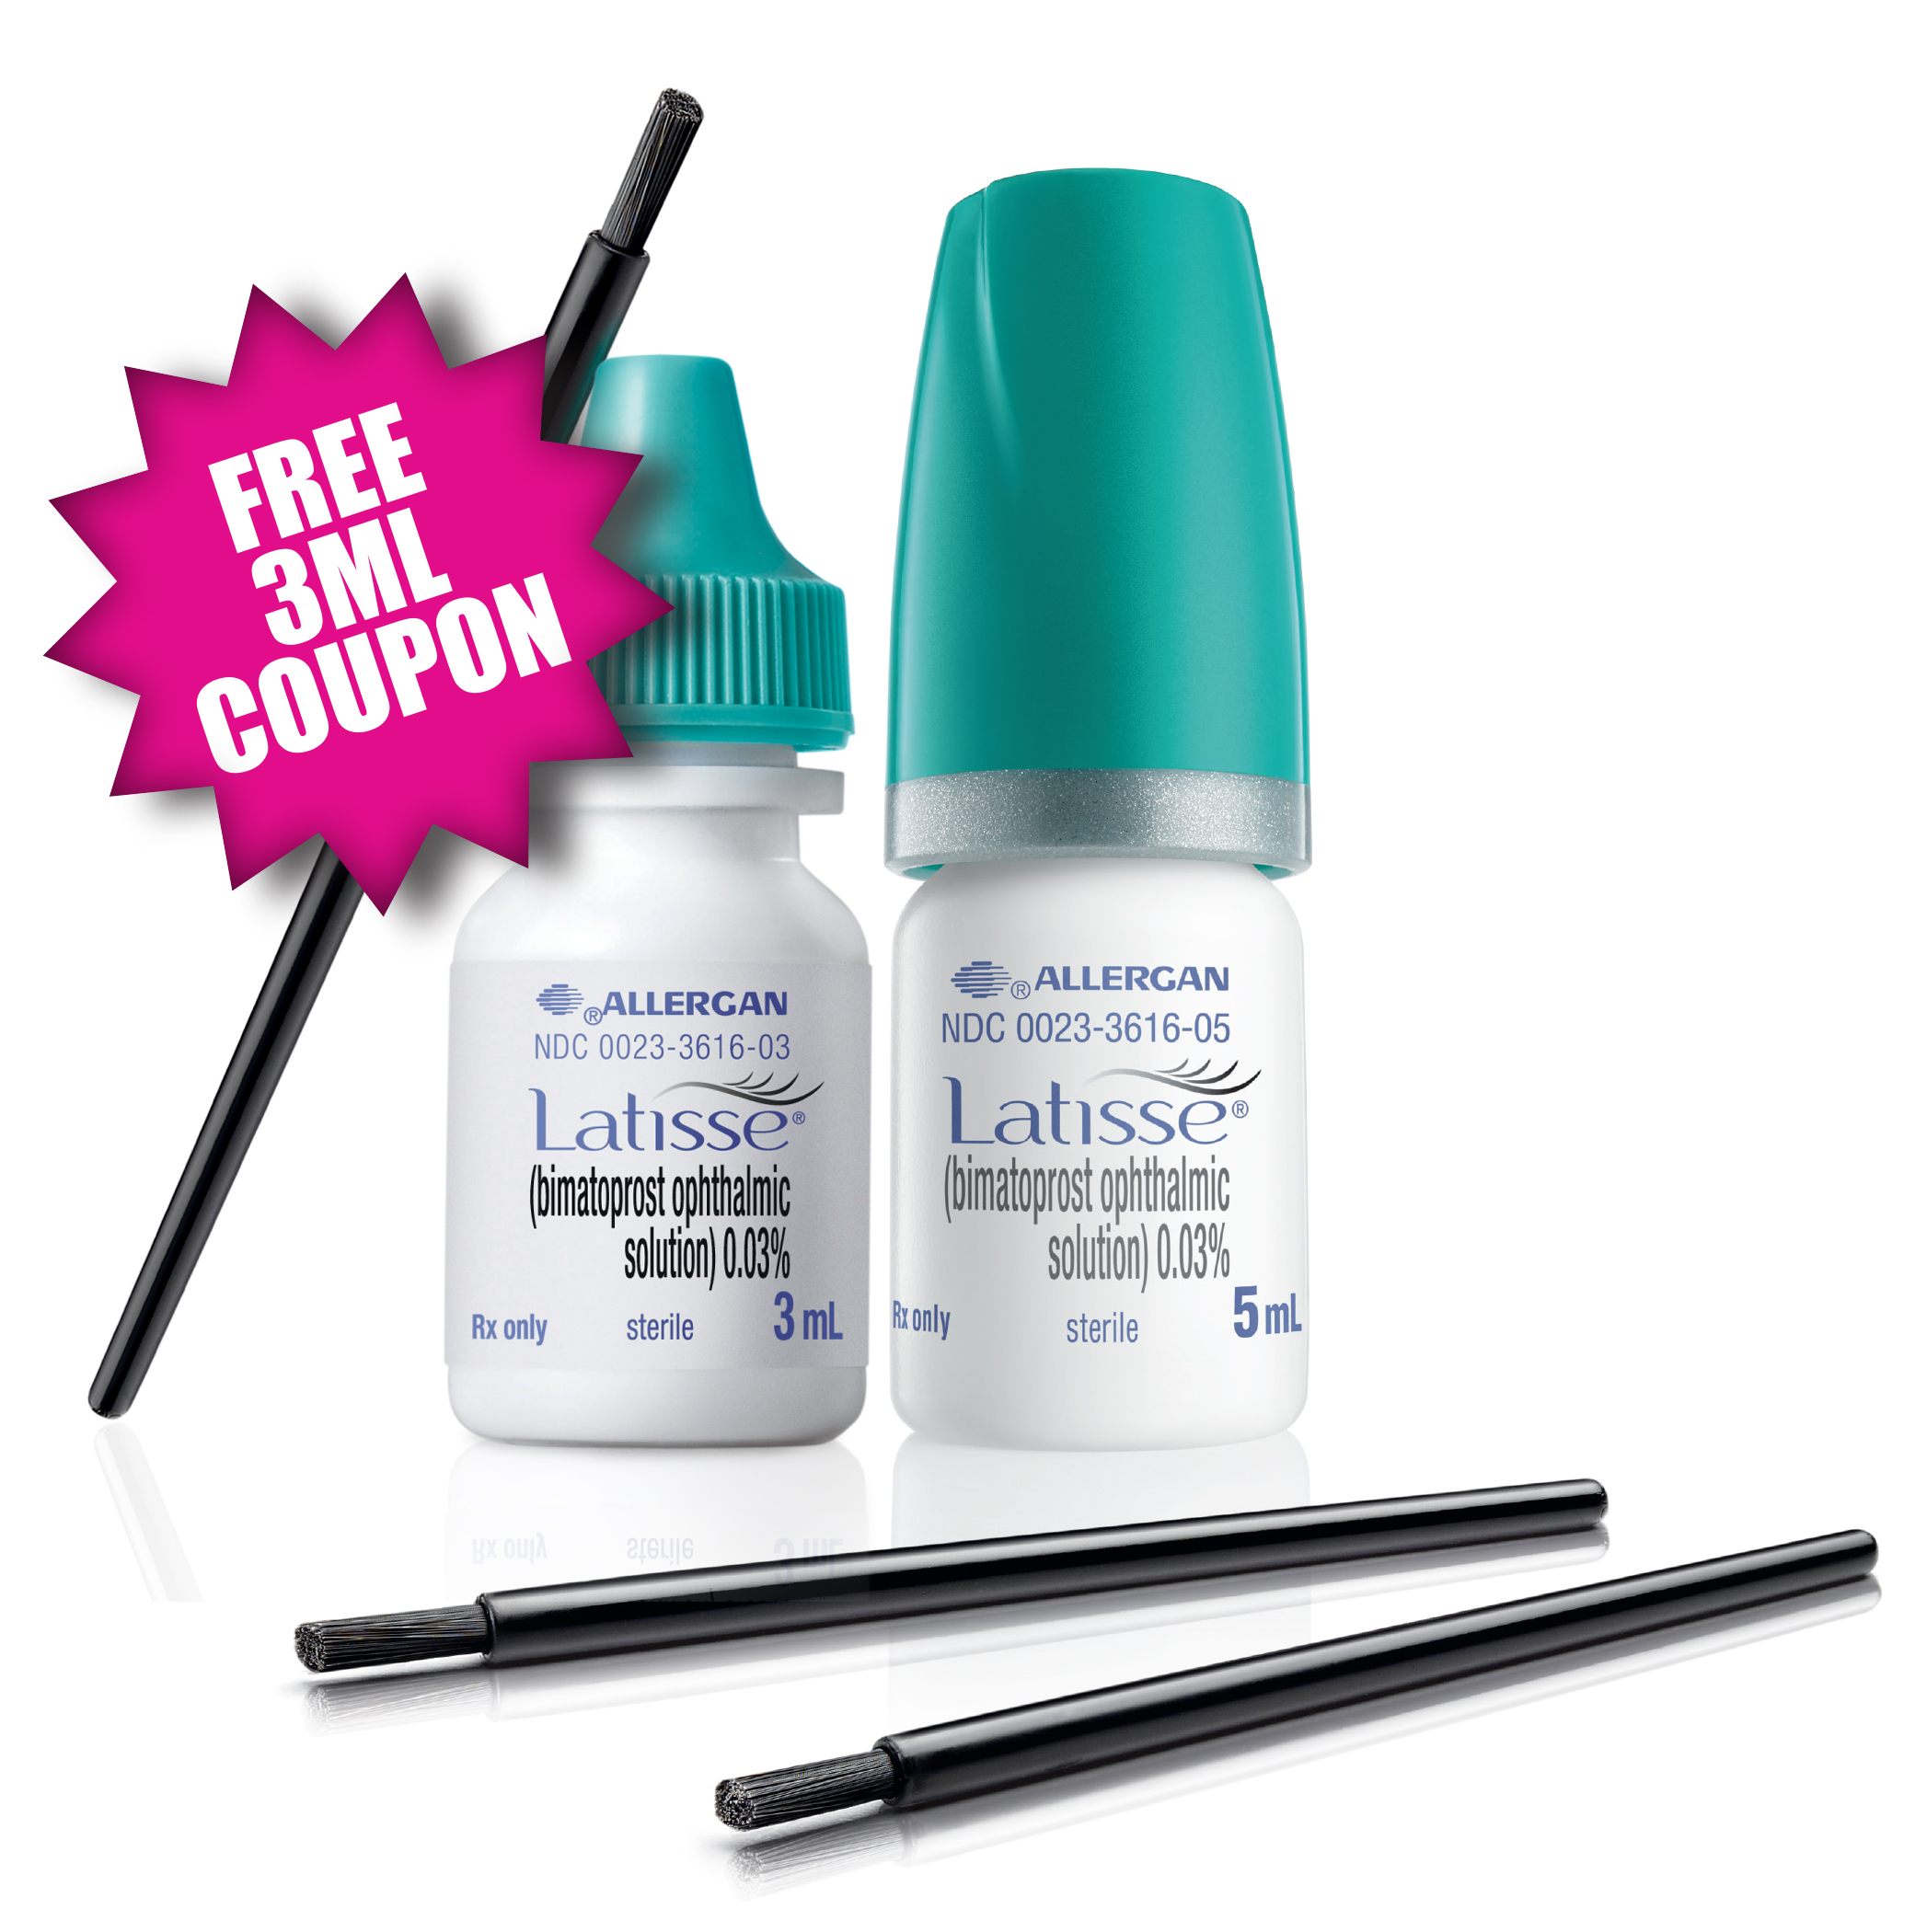 only purchase a Latisse 5ml for $105 and receive a rebate coupon for a comp...